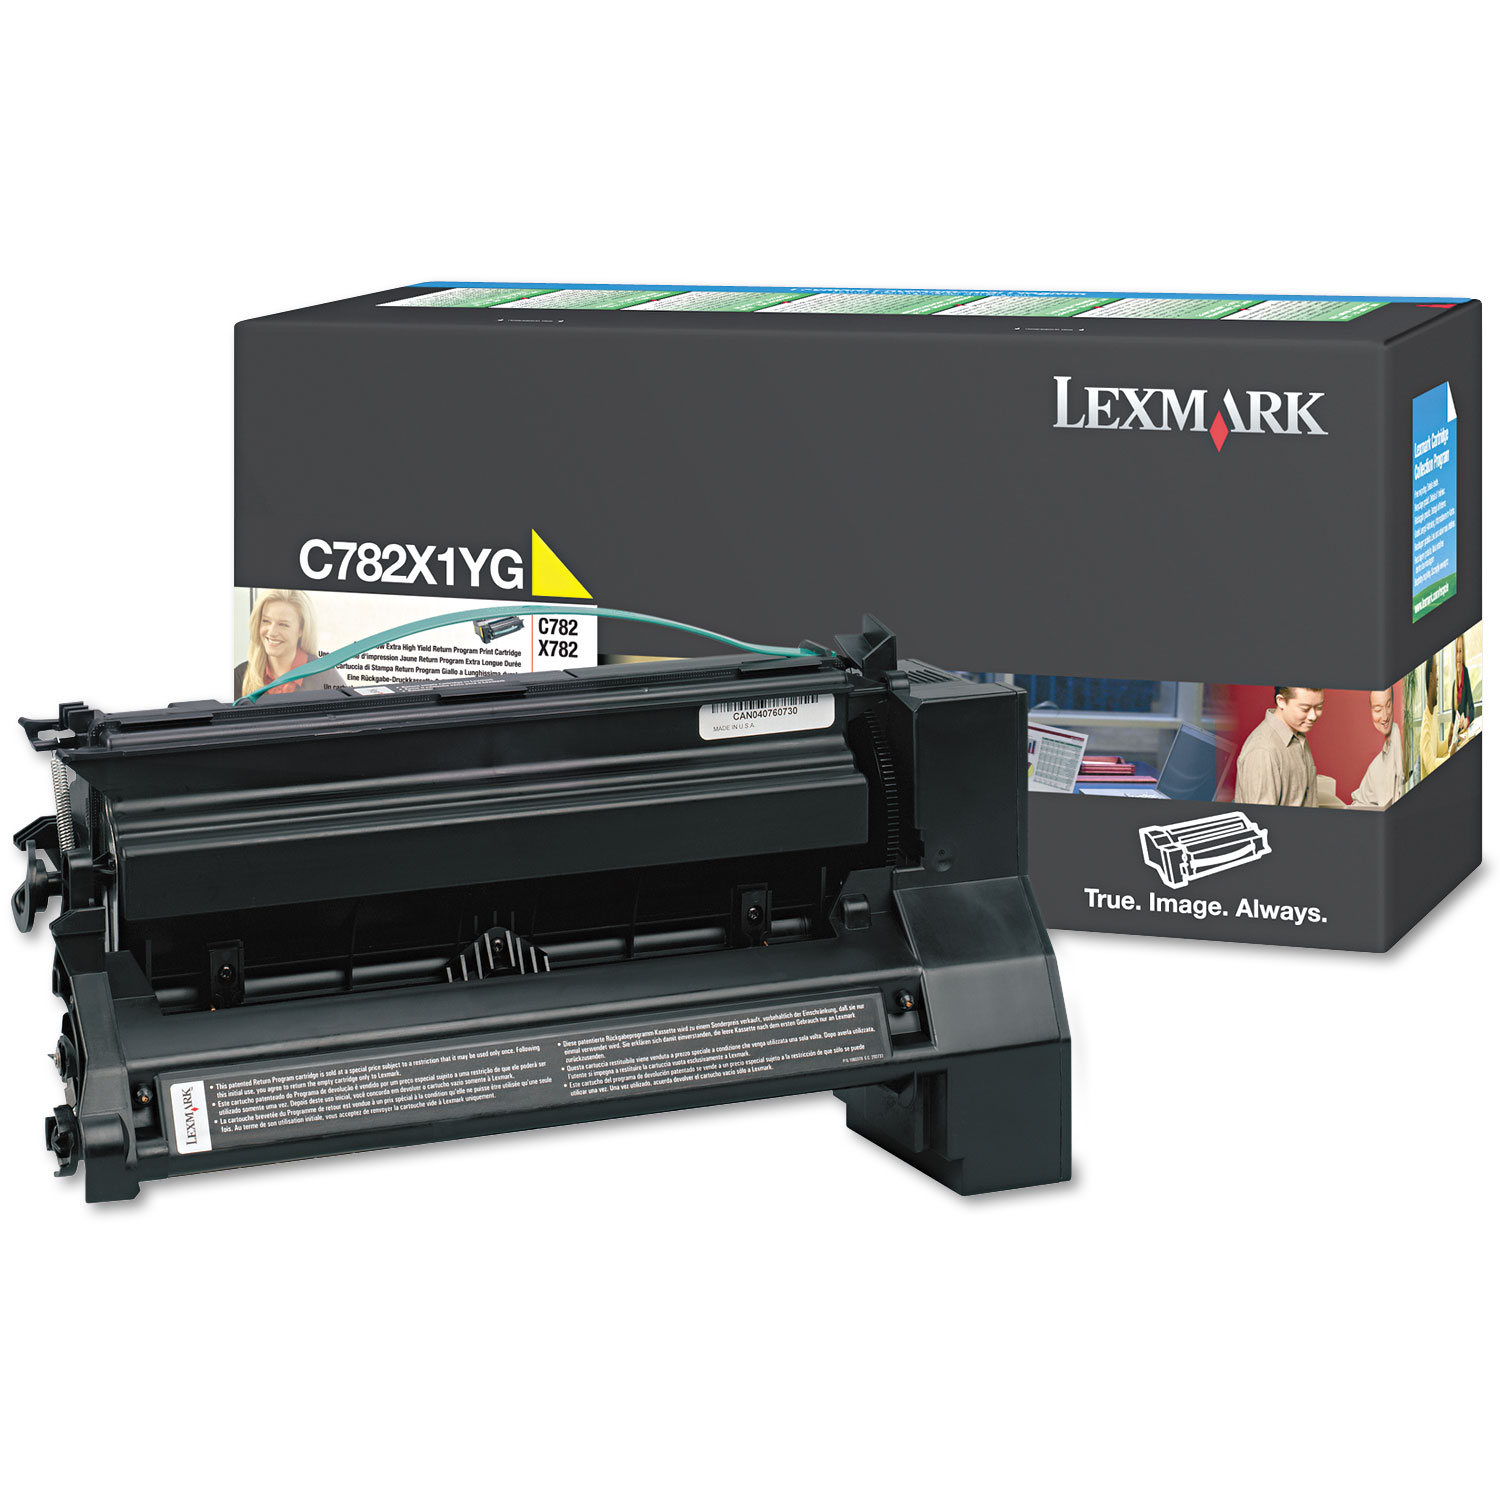 C782X1YG Extra High-Yield Toner, 15000 Page-Yield, Yellow